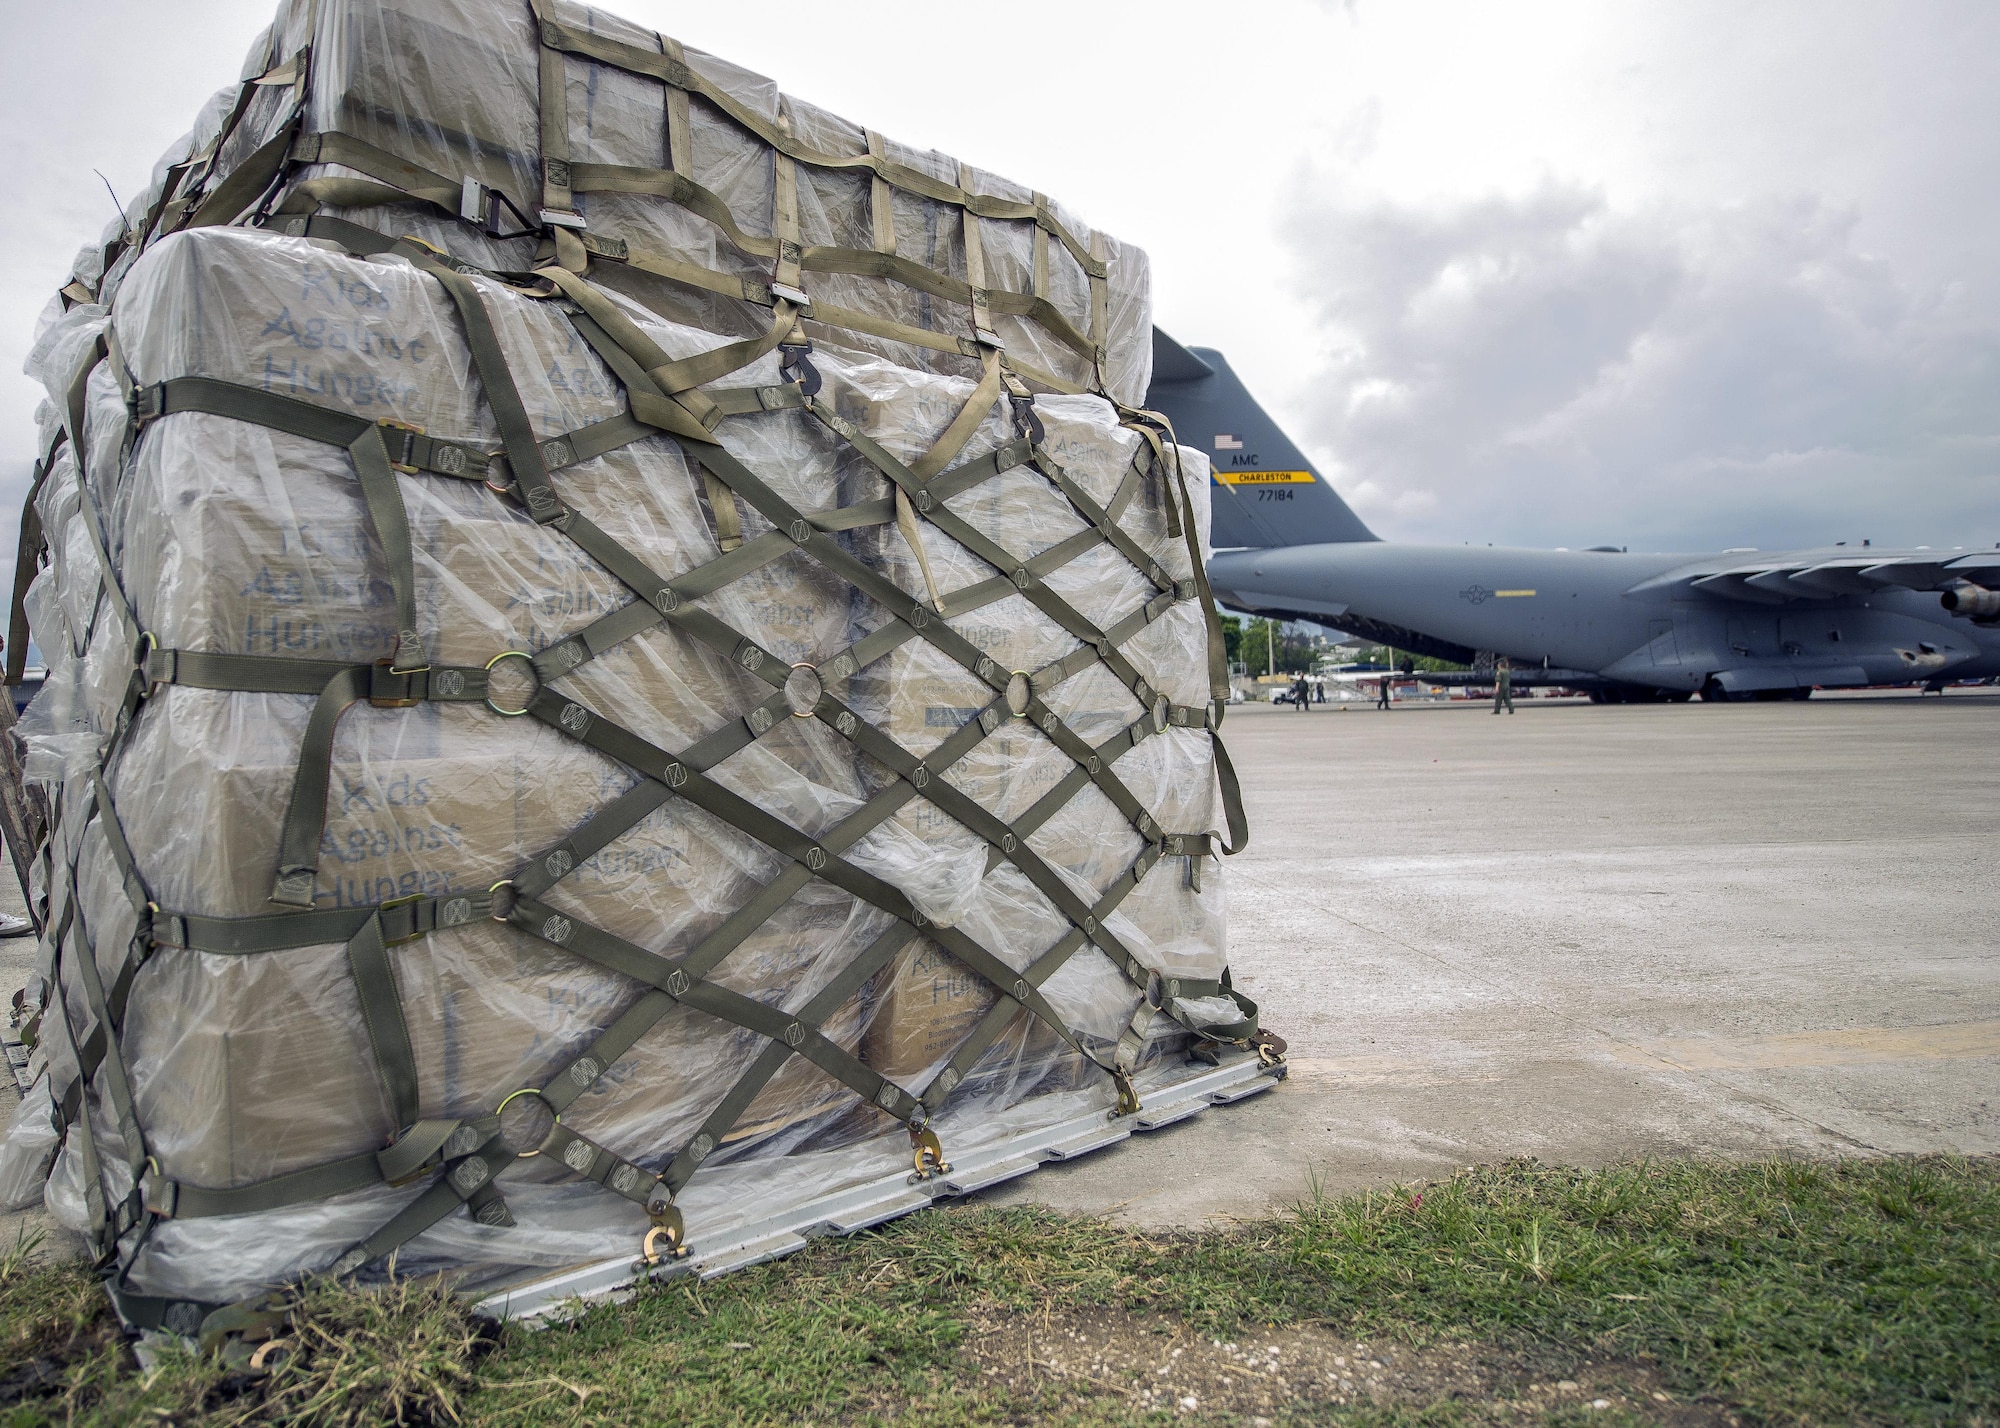 C-17 Globemaster III’s were filled with thirty-two combined pallets and delivered more than 100 thousand total pounds of humanitarian aid to Haiti. Since 1998, The Denton Program has overseen more than 5 million pounds of humanitarian supplies have been sent to more than 50 countries across the globe. (U.S. Air Force photo by Senior Airman Tom Brading)